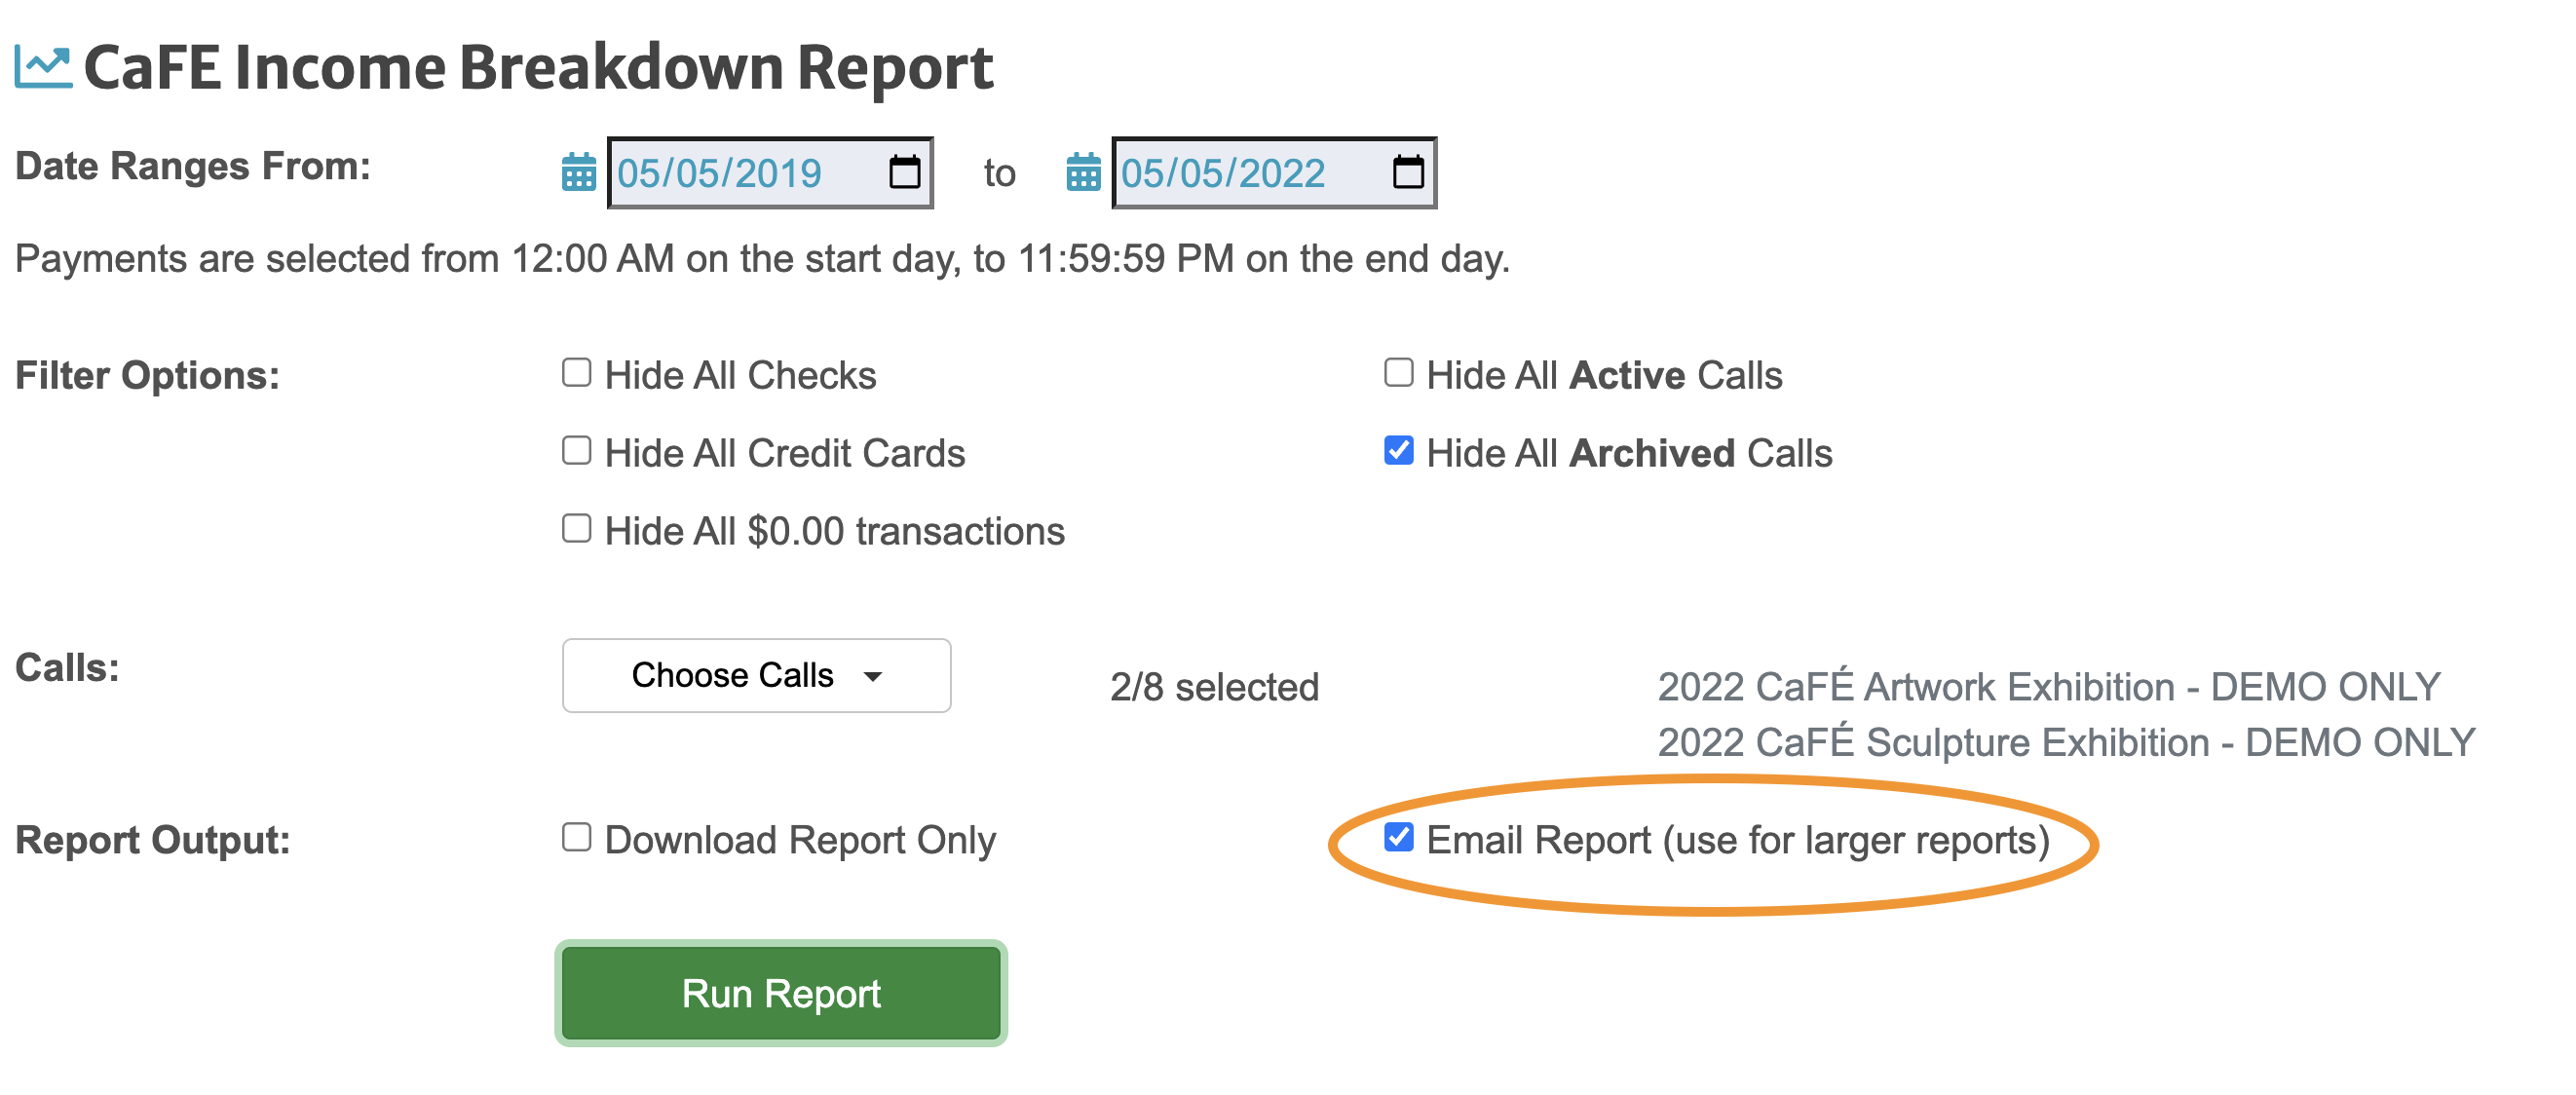 New Features April 2022 Income Breakdown Report Email Screenshot